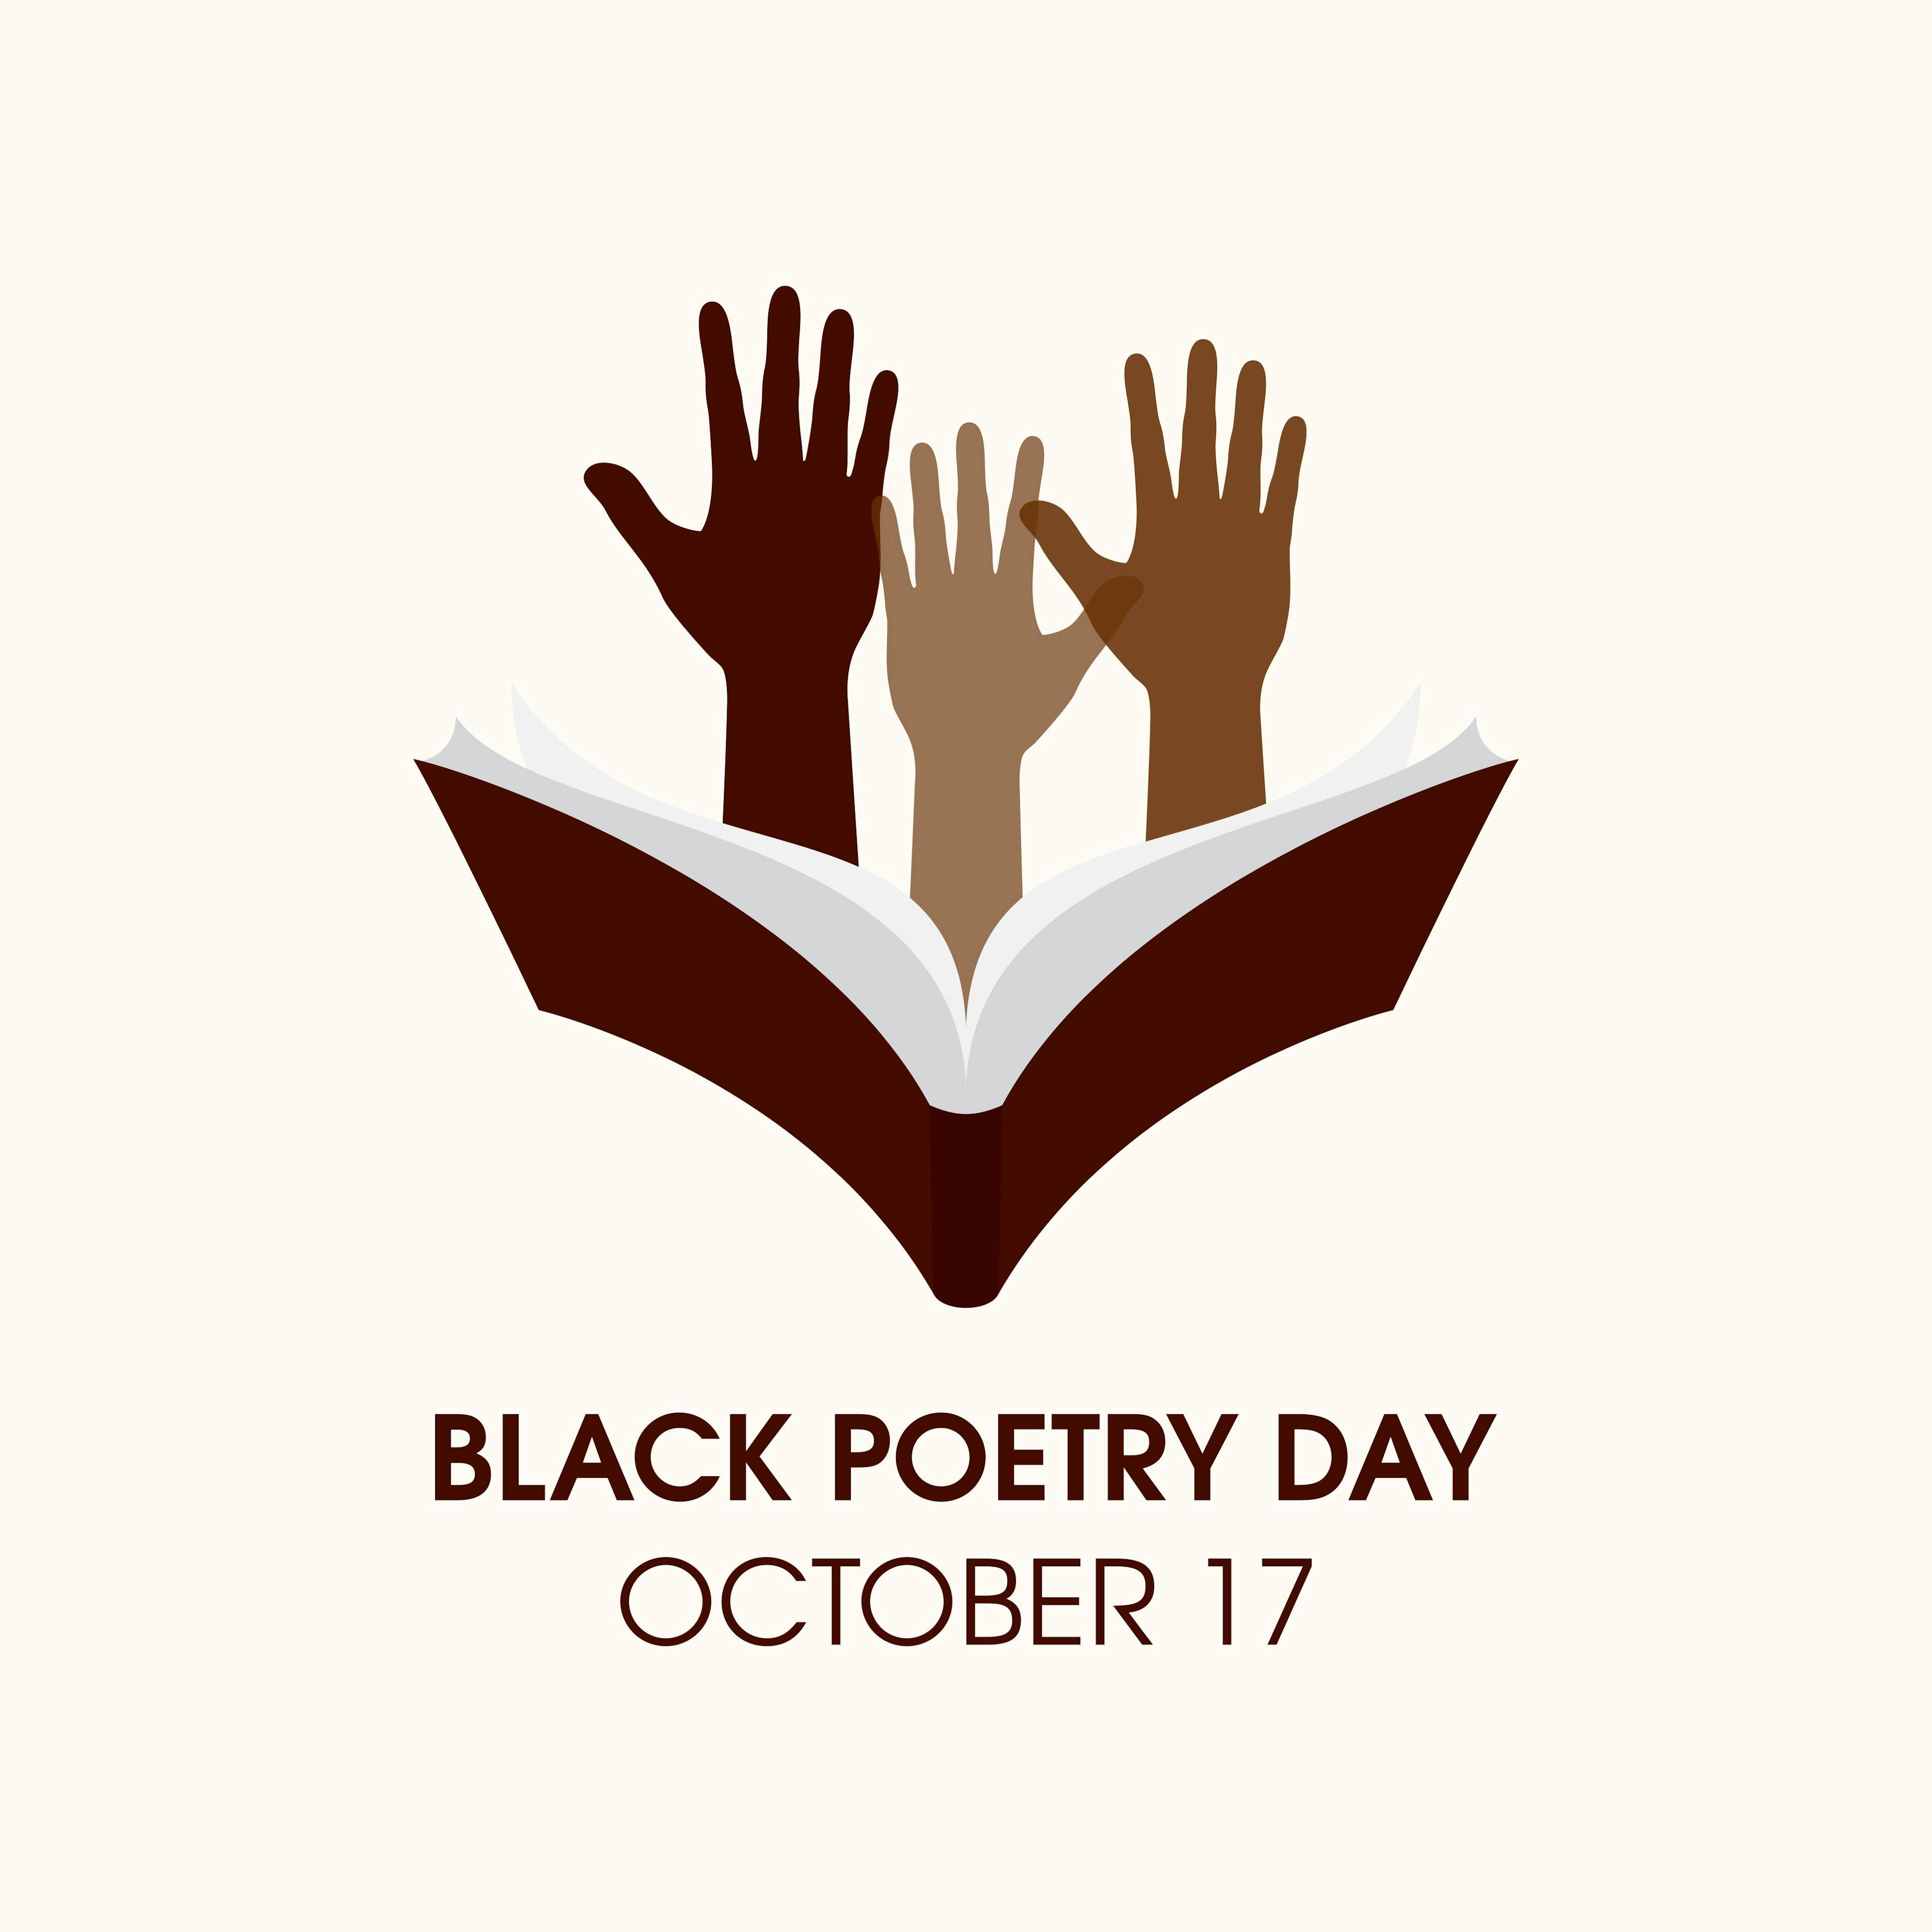 A Psychiatrist Reflects on Black Poetry Day